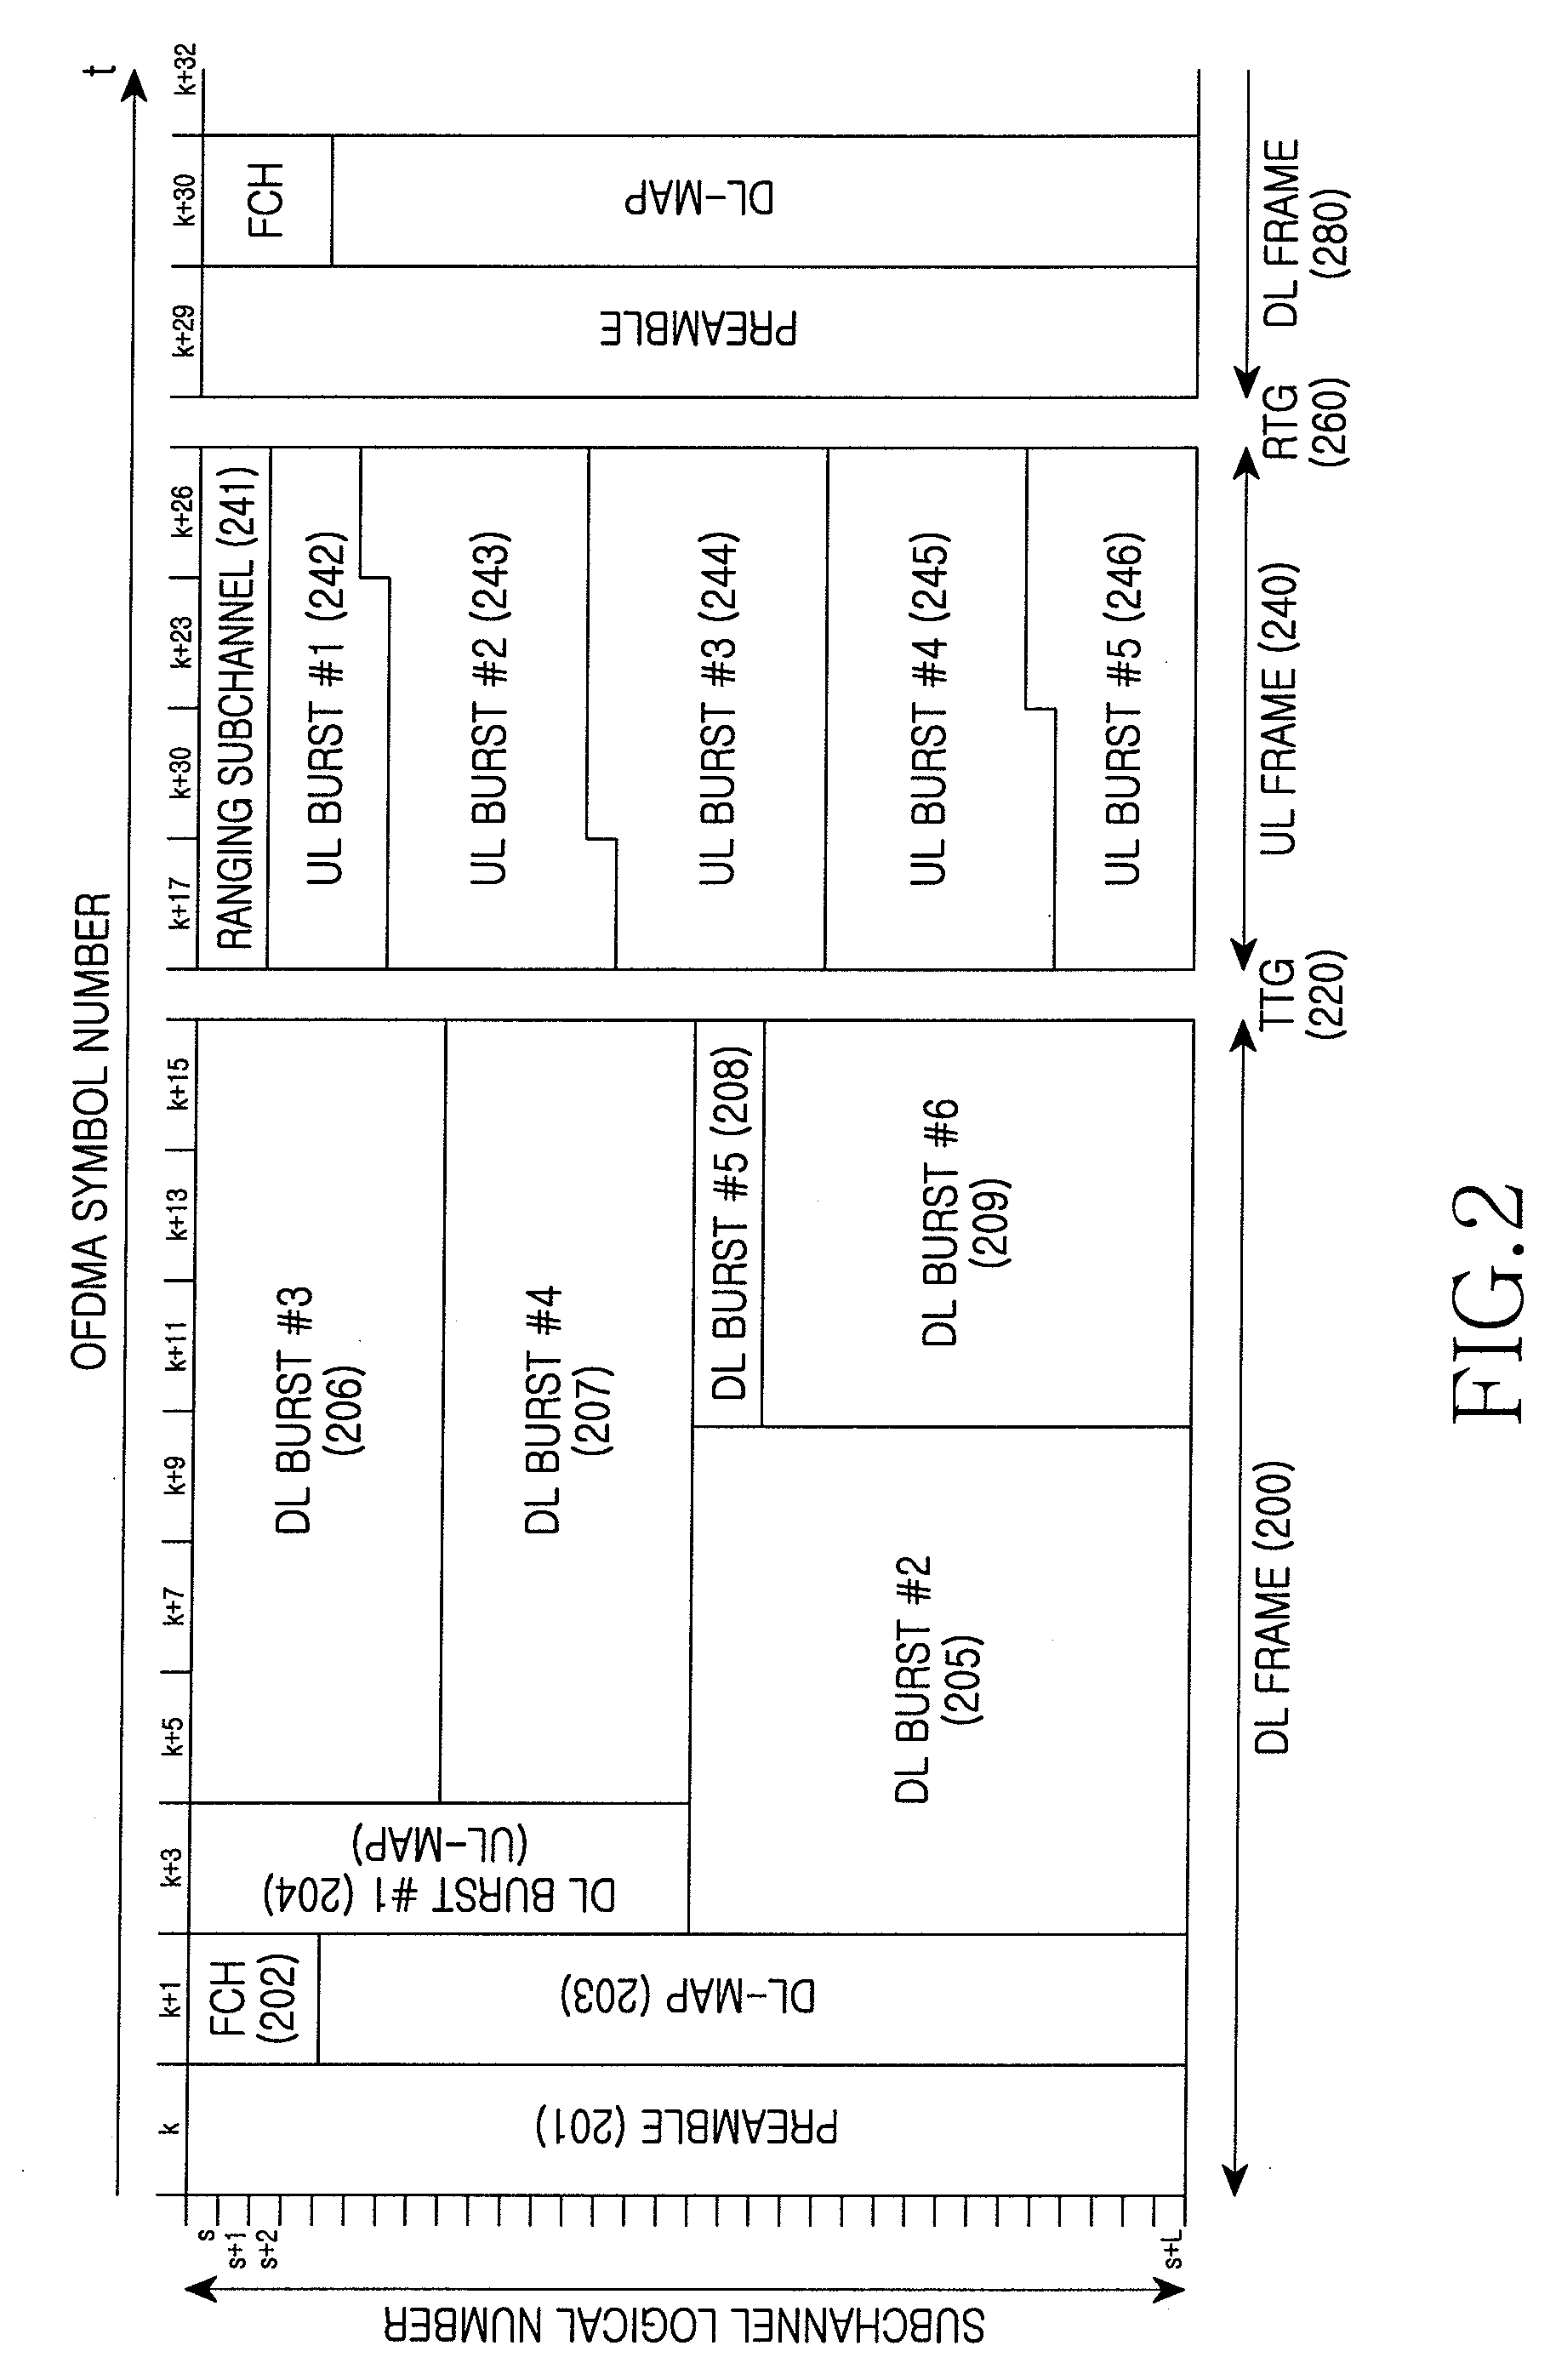 Signal transmission/reception apparatus and method to minimize inter-cell interference in a communication system